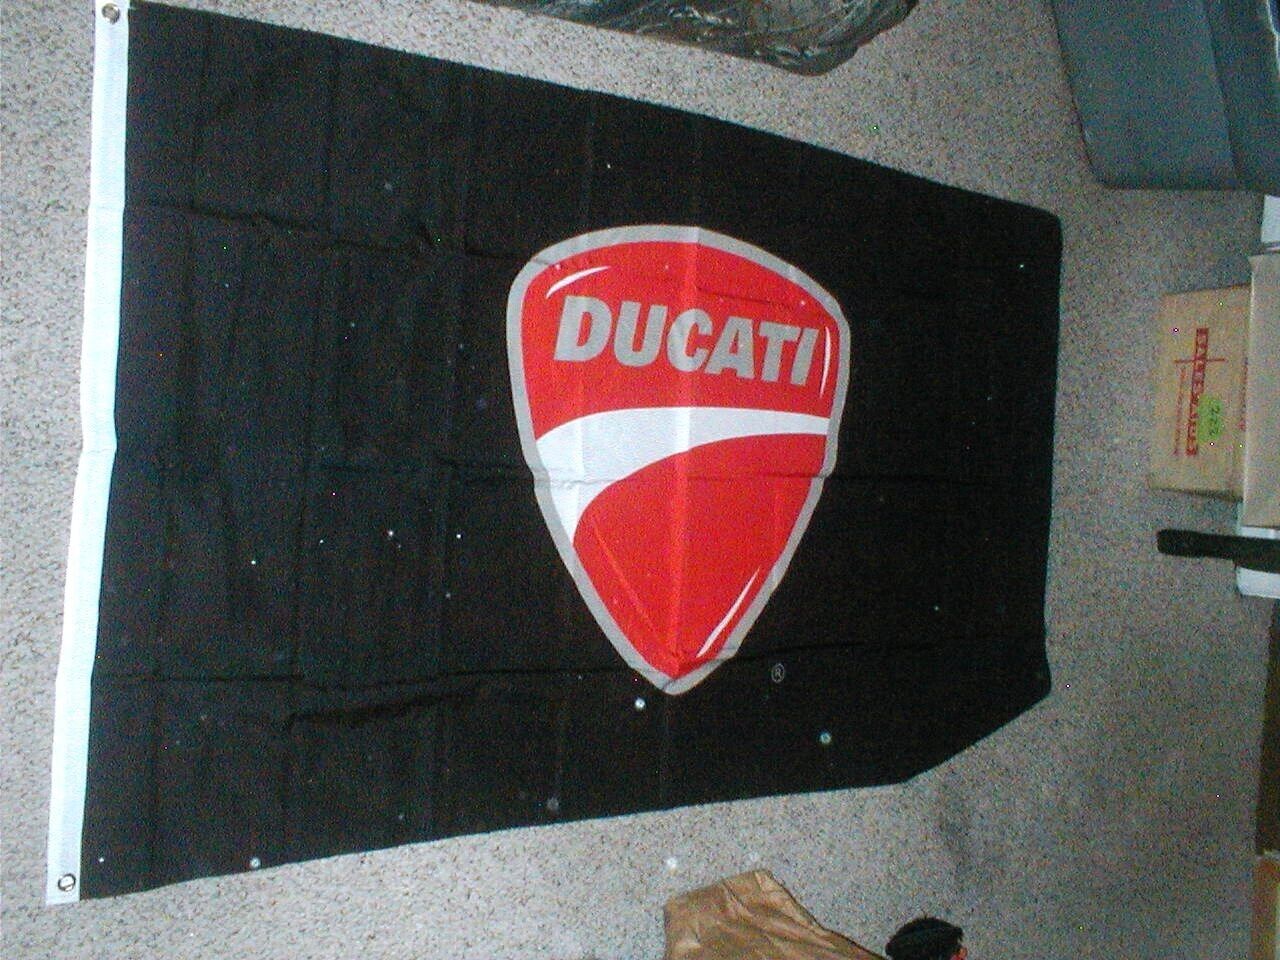 DUCATI Racing Motorcycles Dealer\'s Dealership Wall Banner Flag 3\' x 5\' with Logo